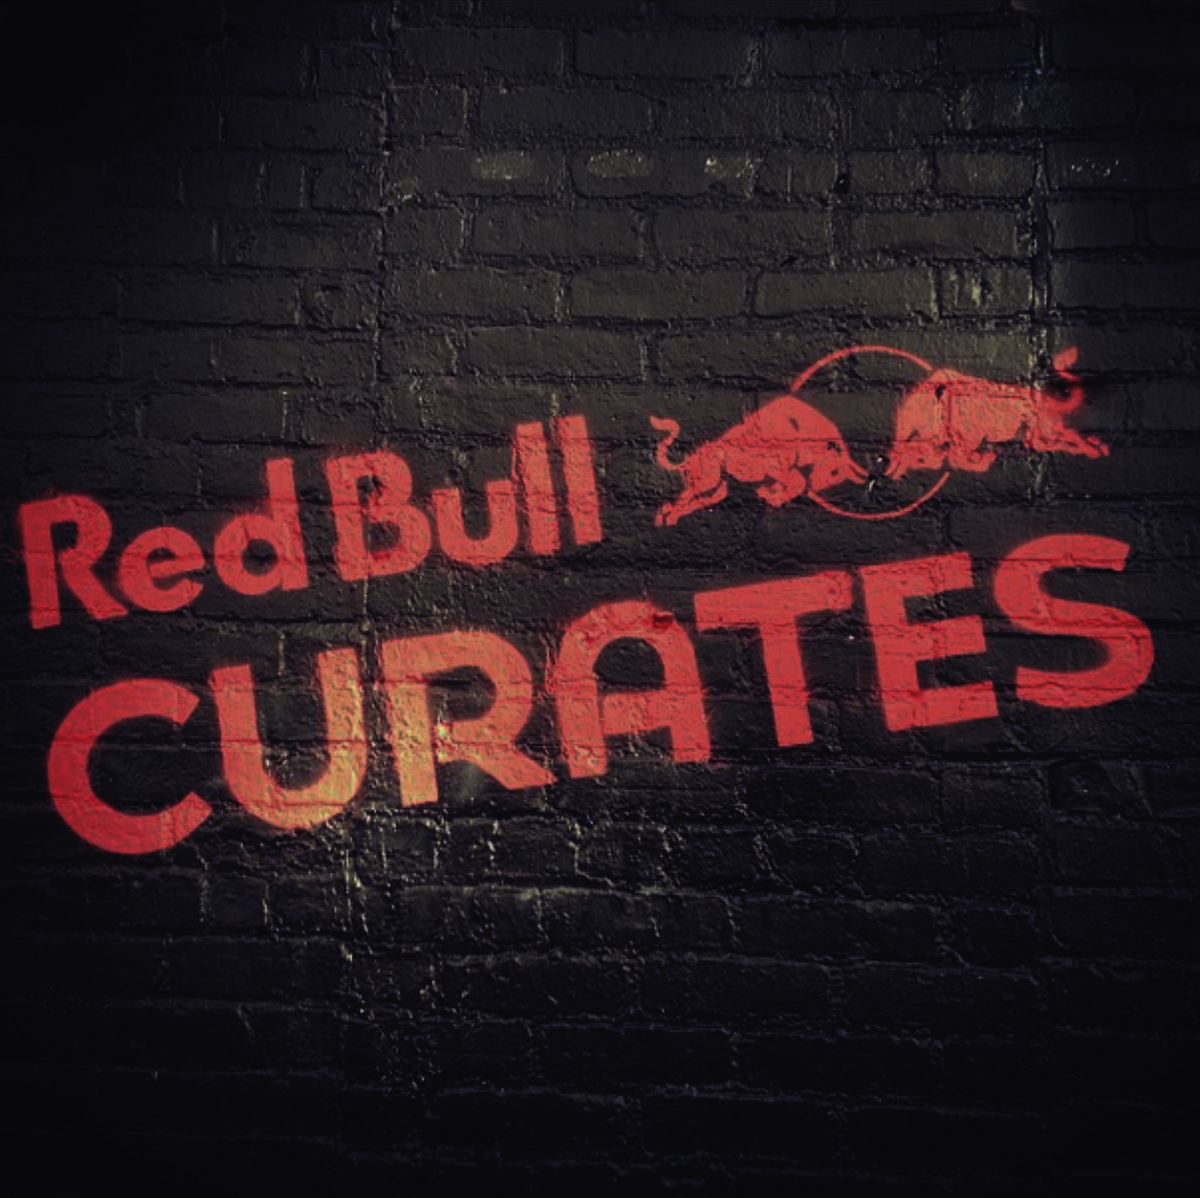 Red Bull Curates canvas cooler #canvascooler stencil on-field